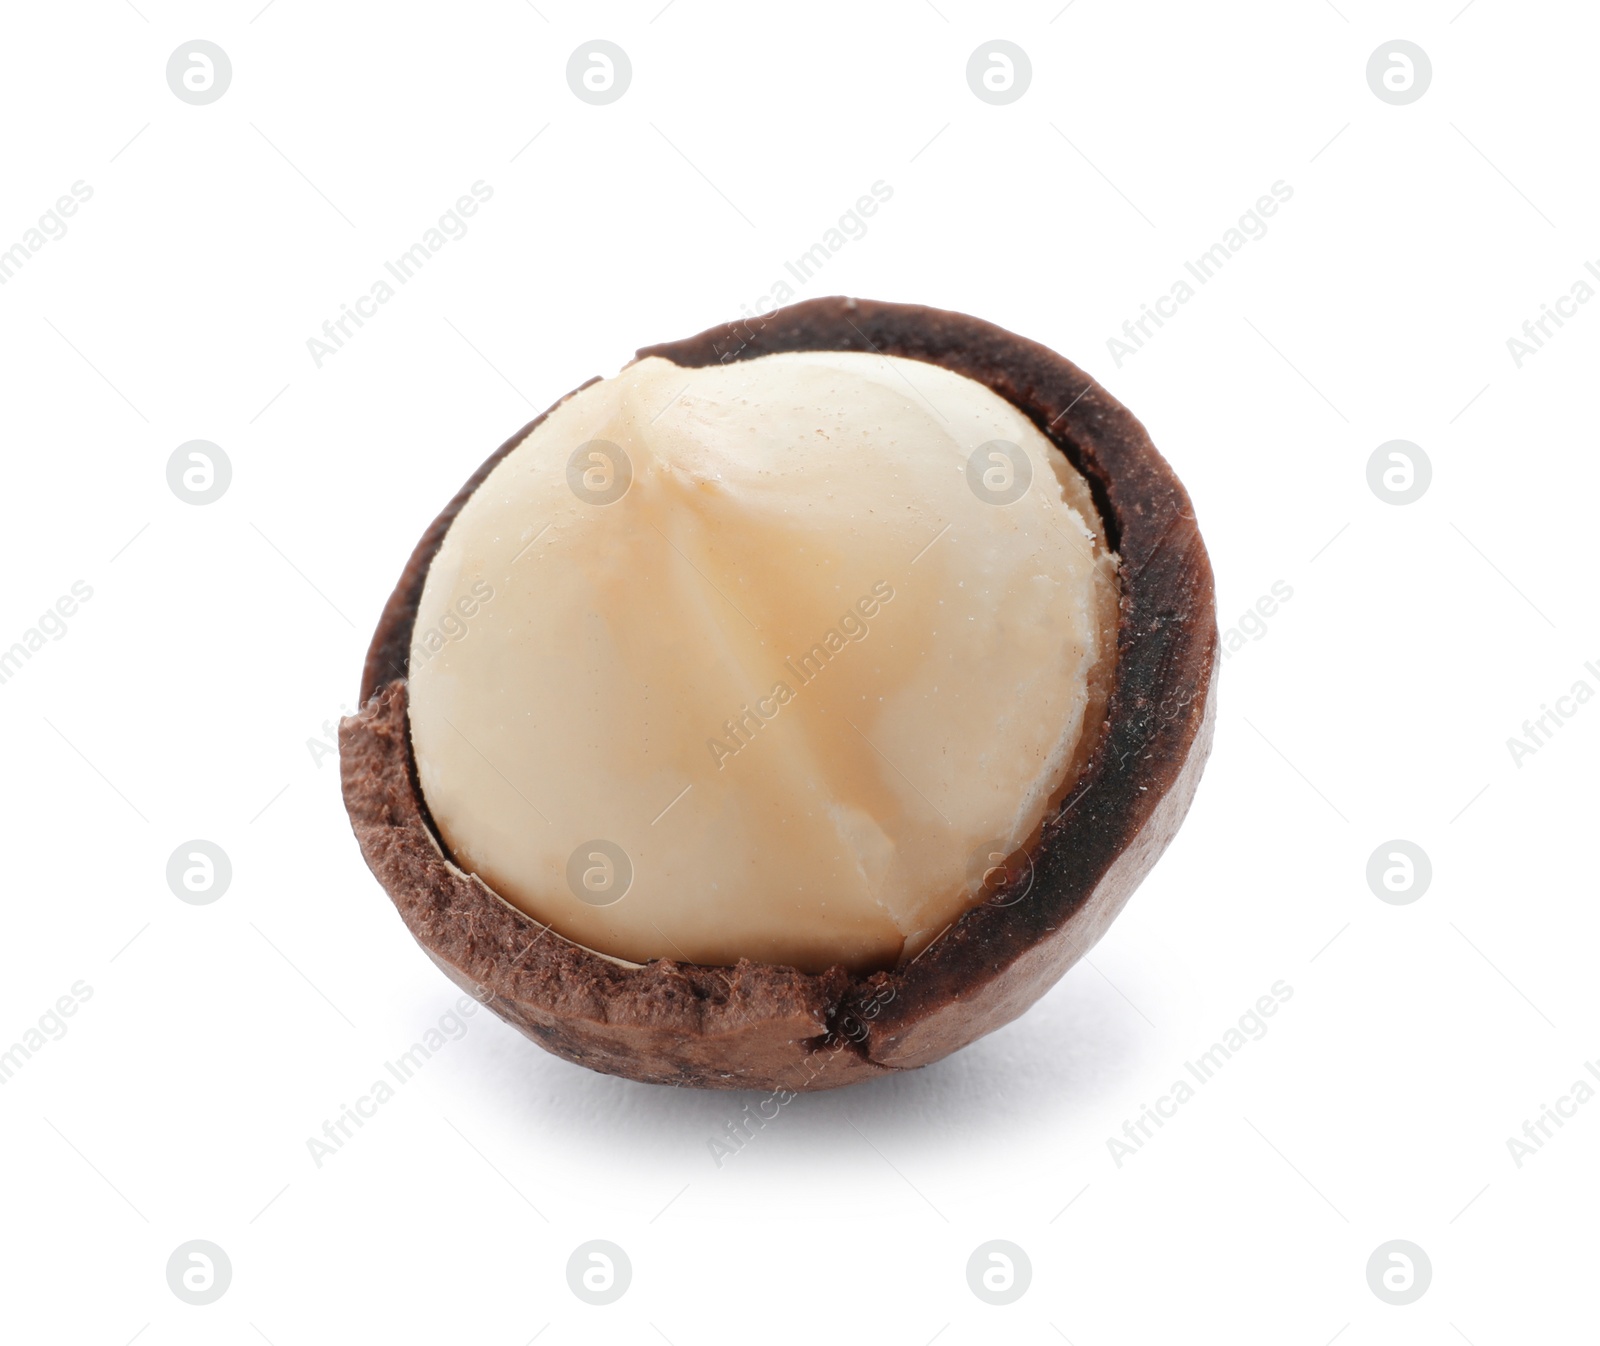 Photo of Organic Macadamia nut and shell on white background